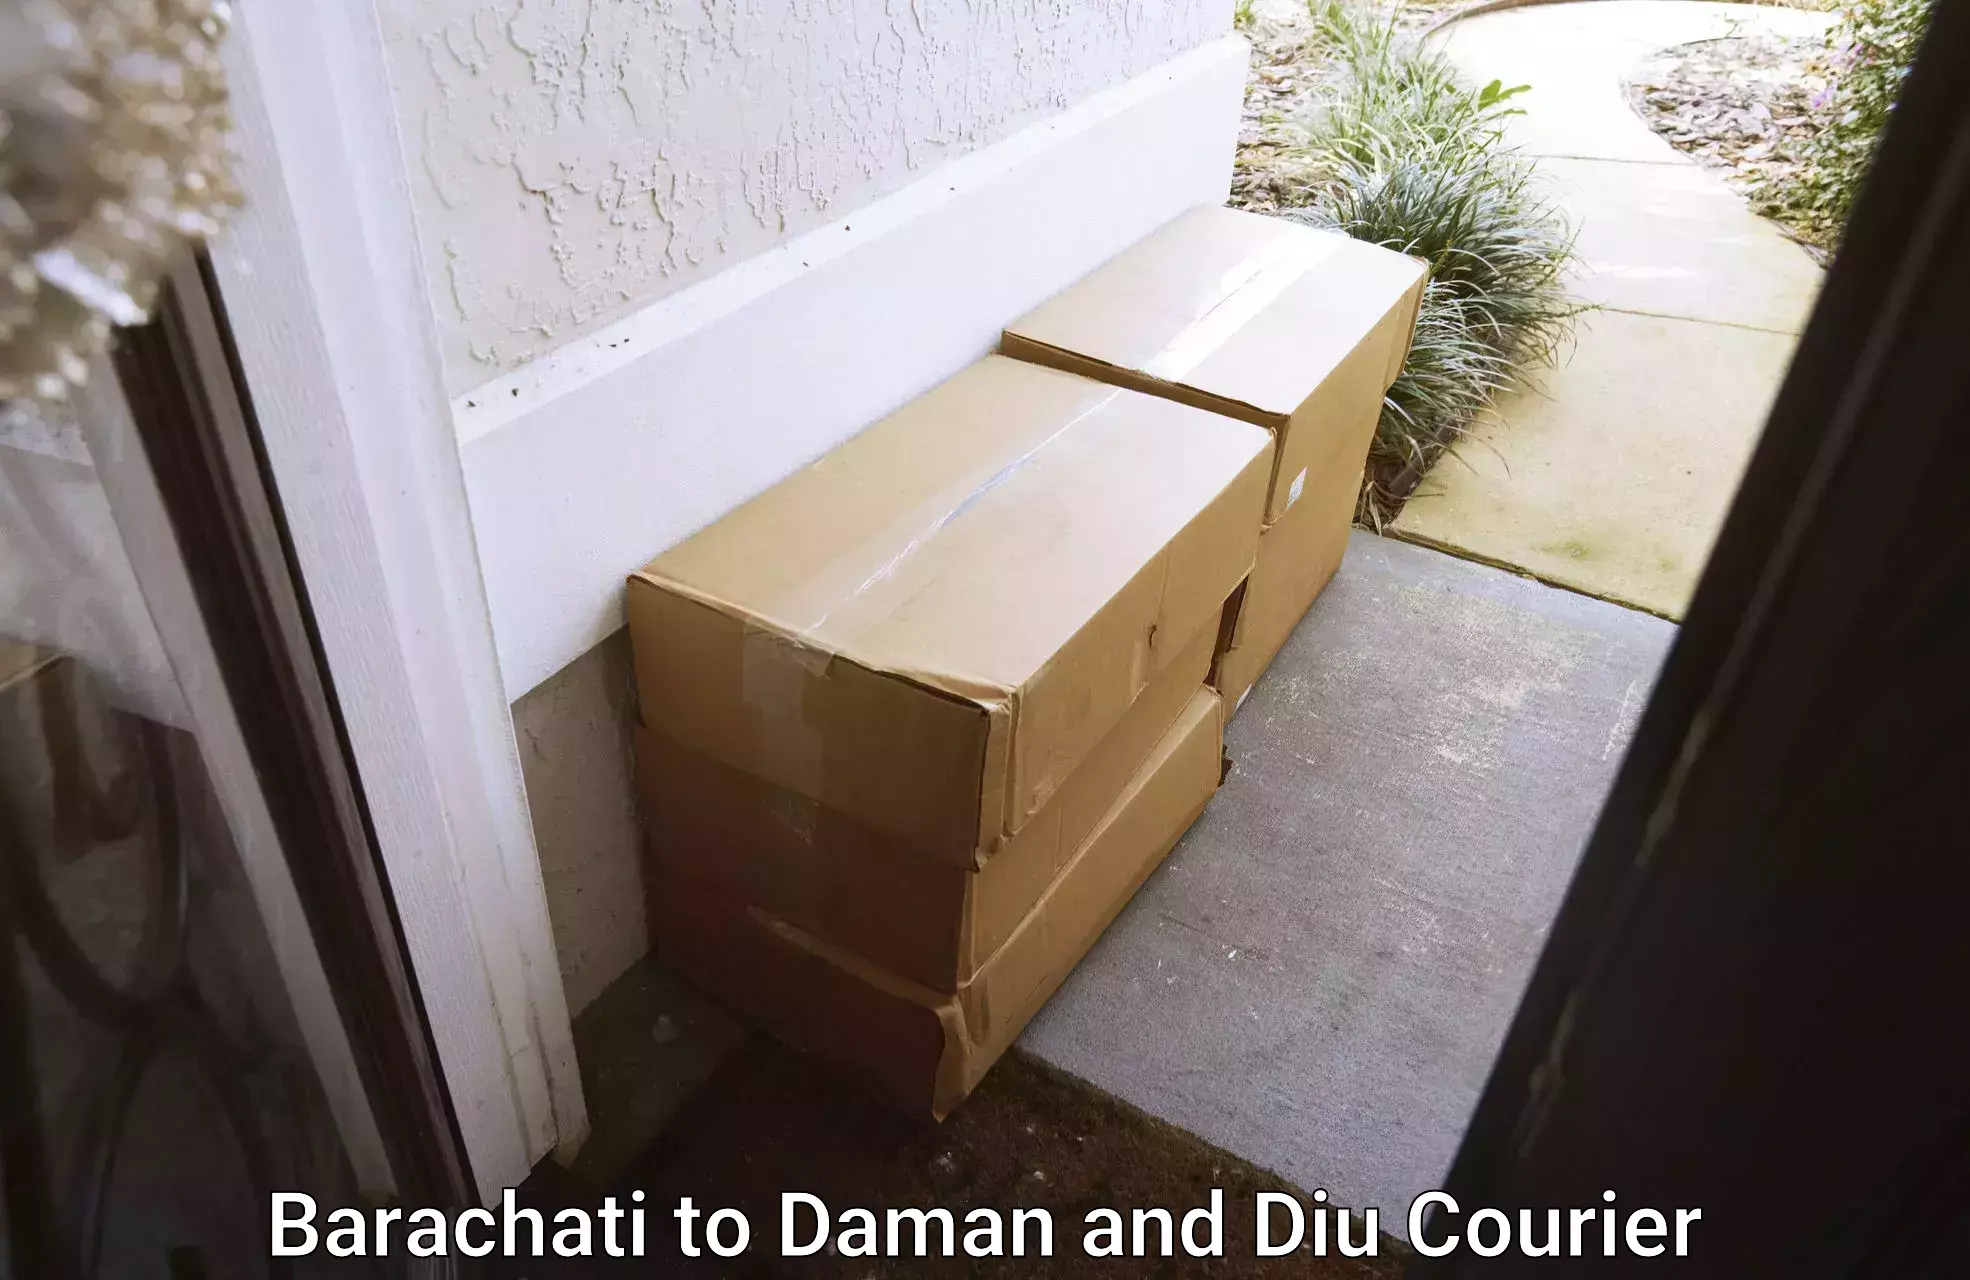 Quality relocation assistance Barachati to Daman and Diu